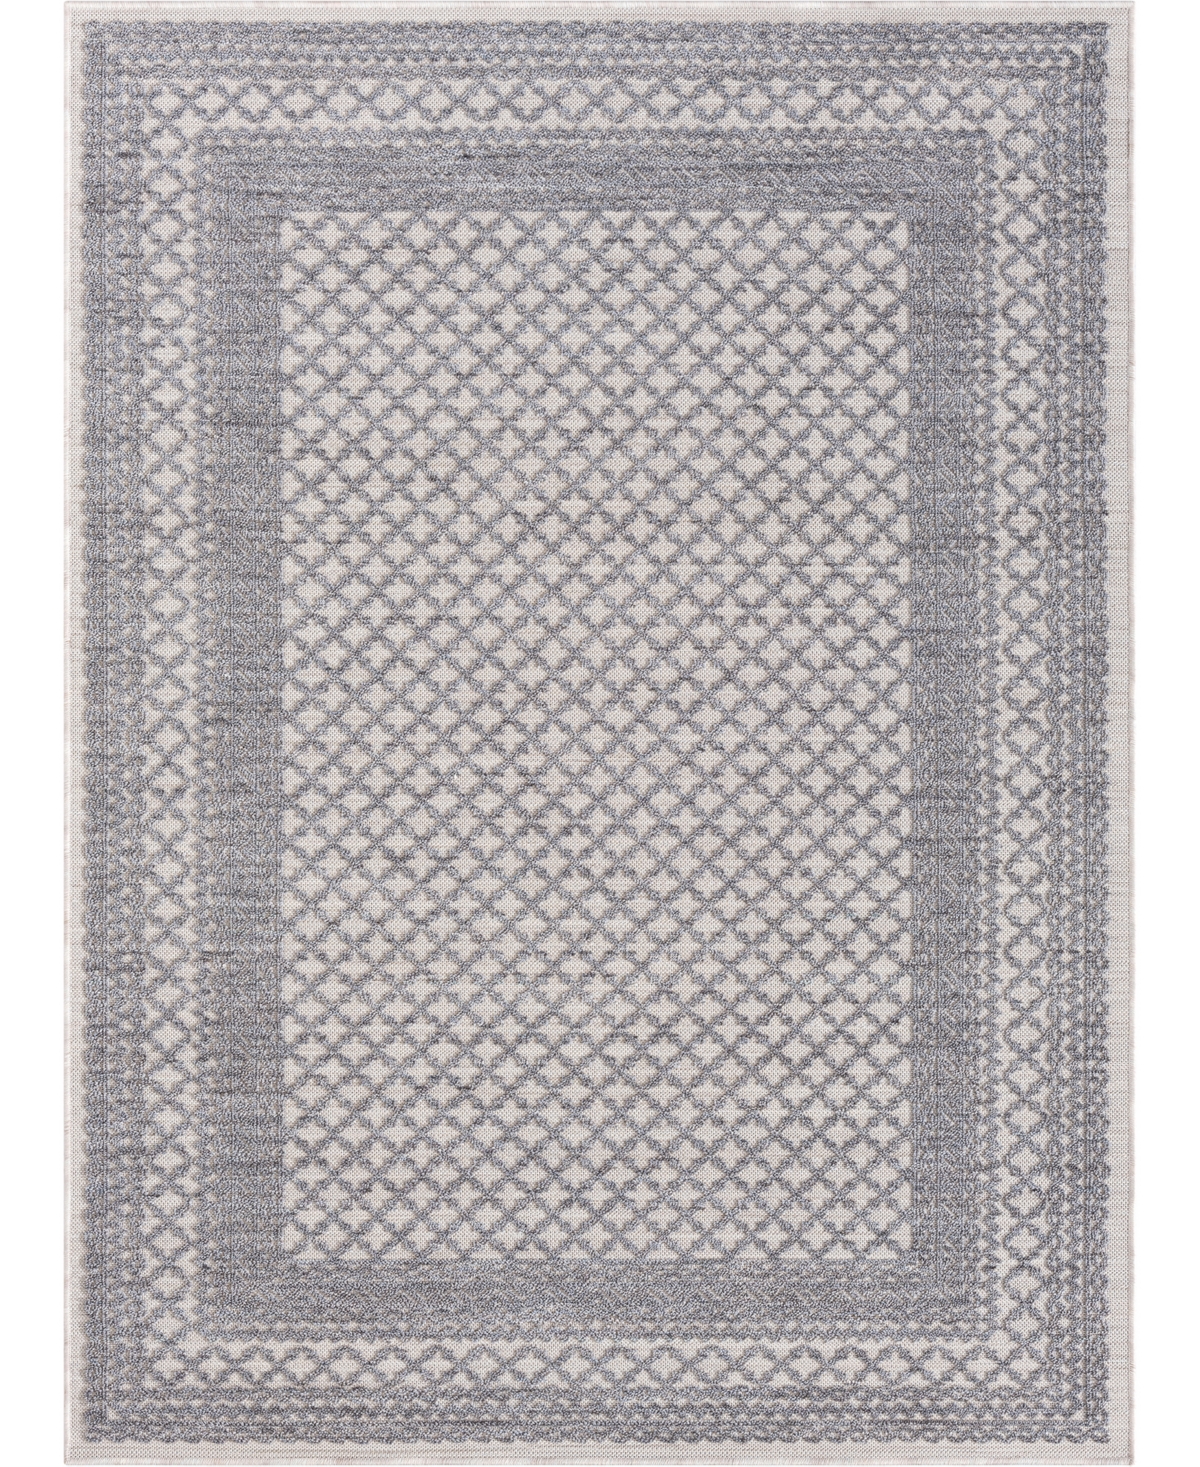 Lr Home Wagner Wagnr82291 5' X 7' Outdoor Area Rug In Mist